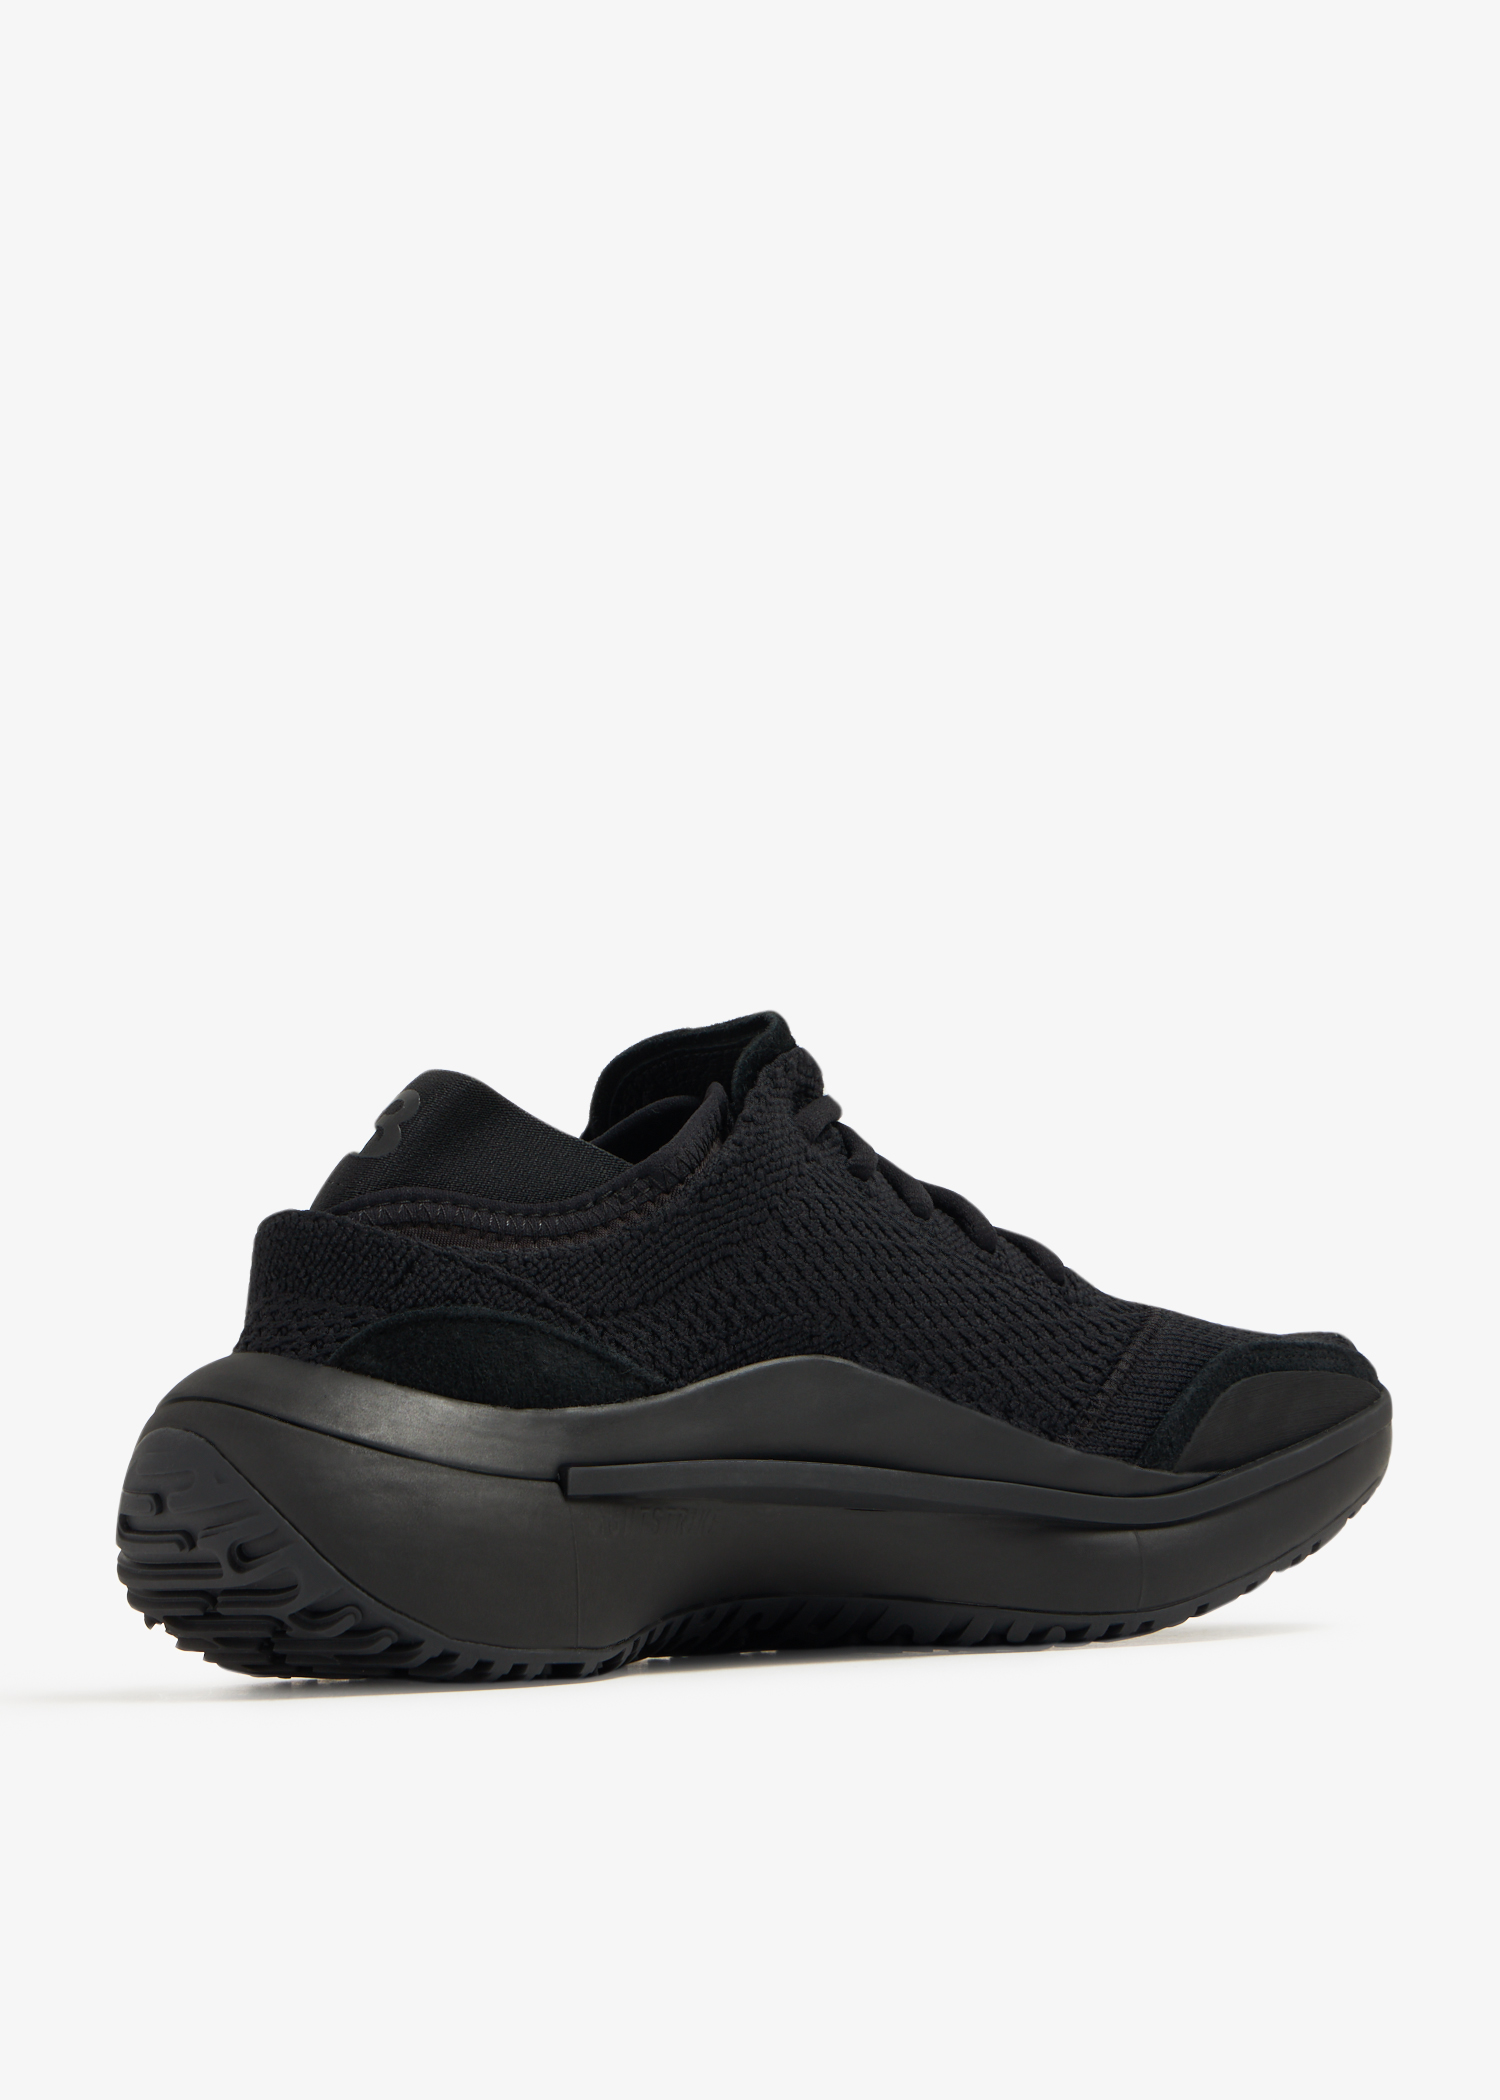 Adidas Y-3 Qisan knit sneakers for Women - Black in KSA | Level Shoes